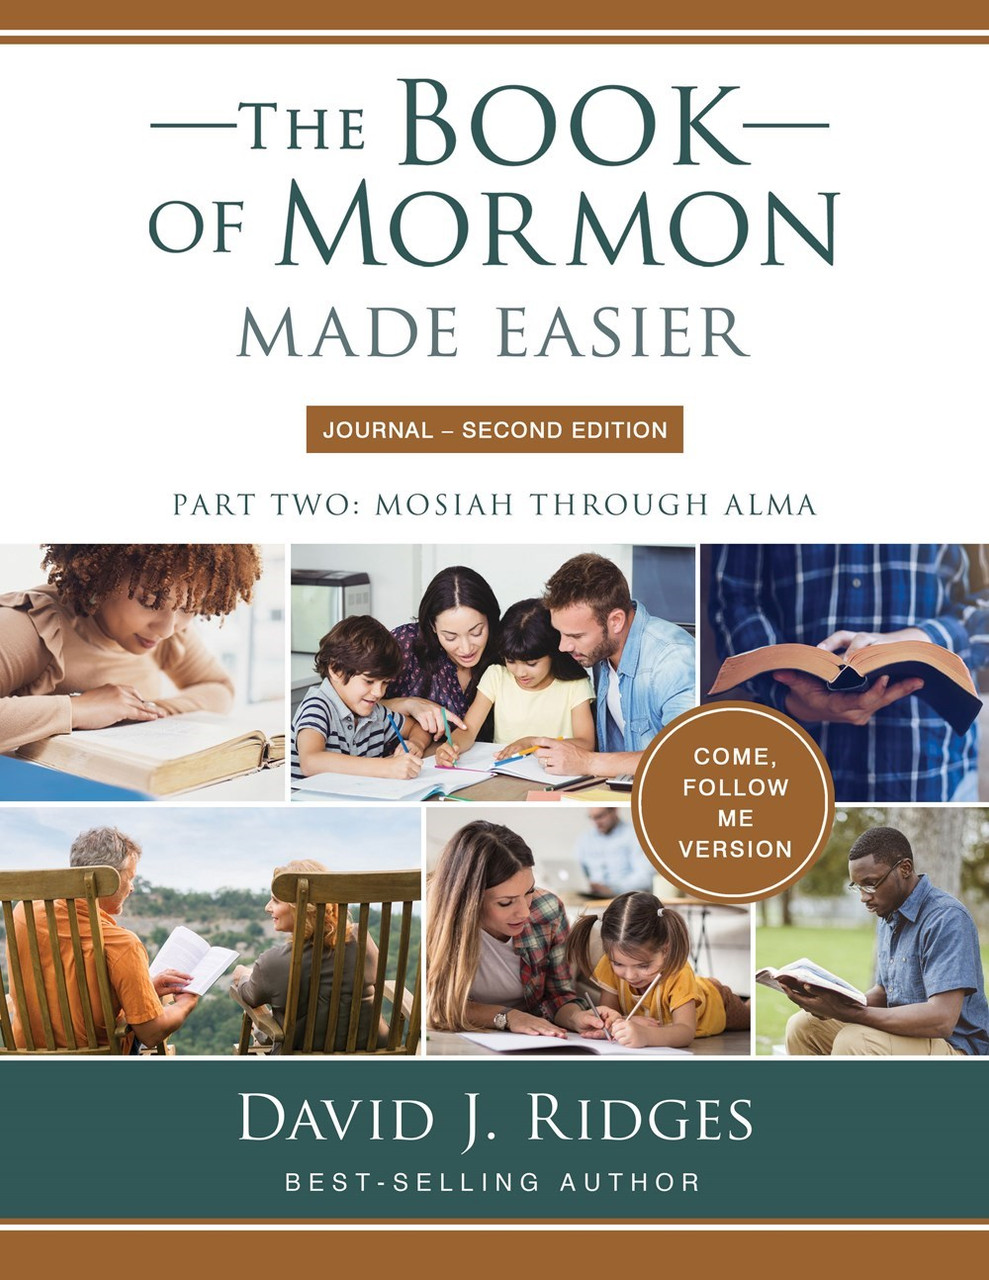 The Gospel Study Series: The Book of Mormon Made Easier Study Guide Parts 1, 2, and 3 Come, Follow Me Second Edition (Paperback)* While Supplies Last